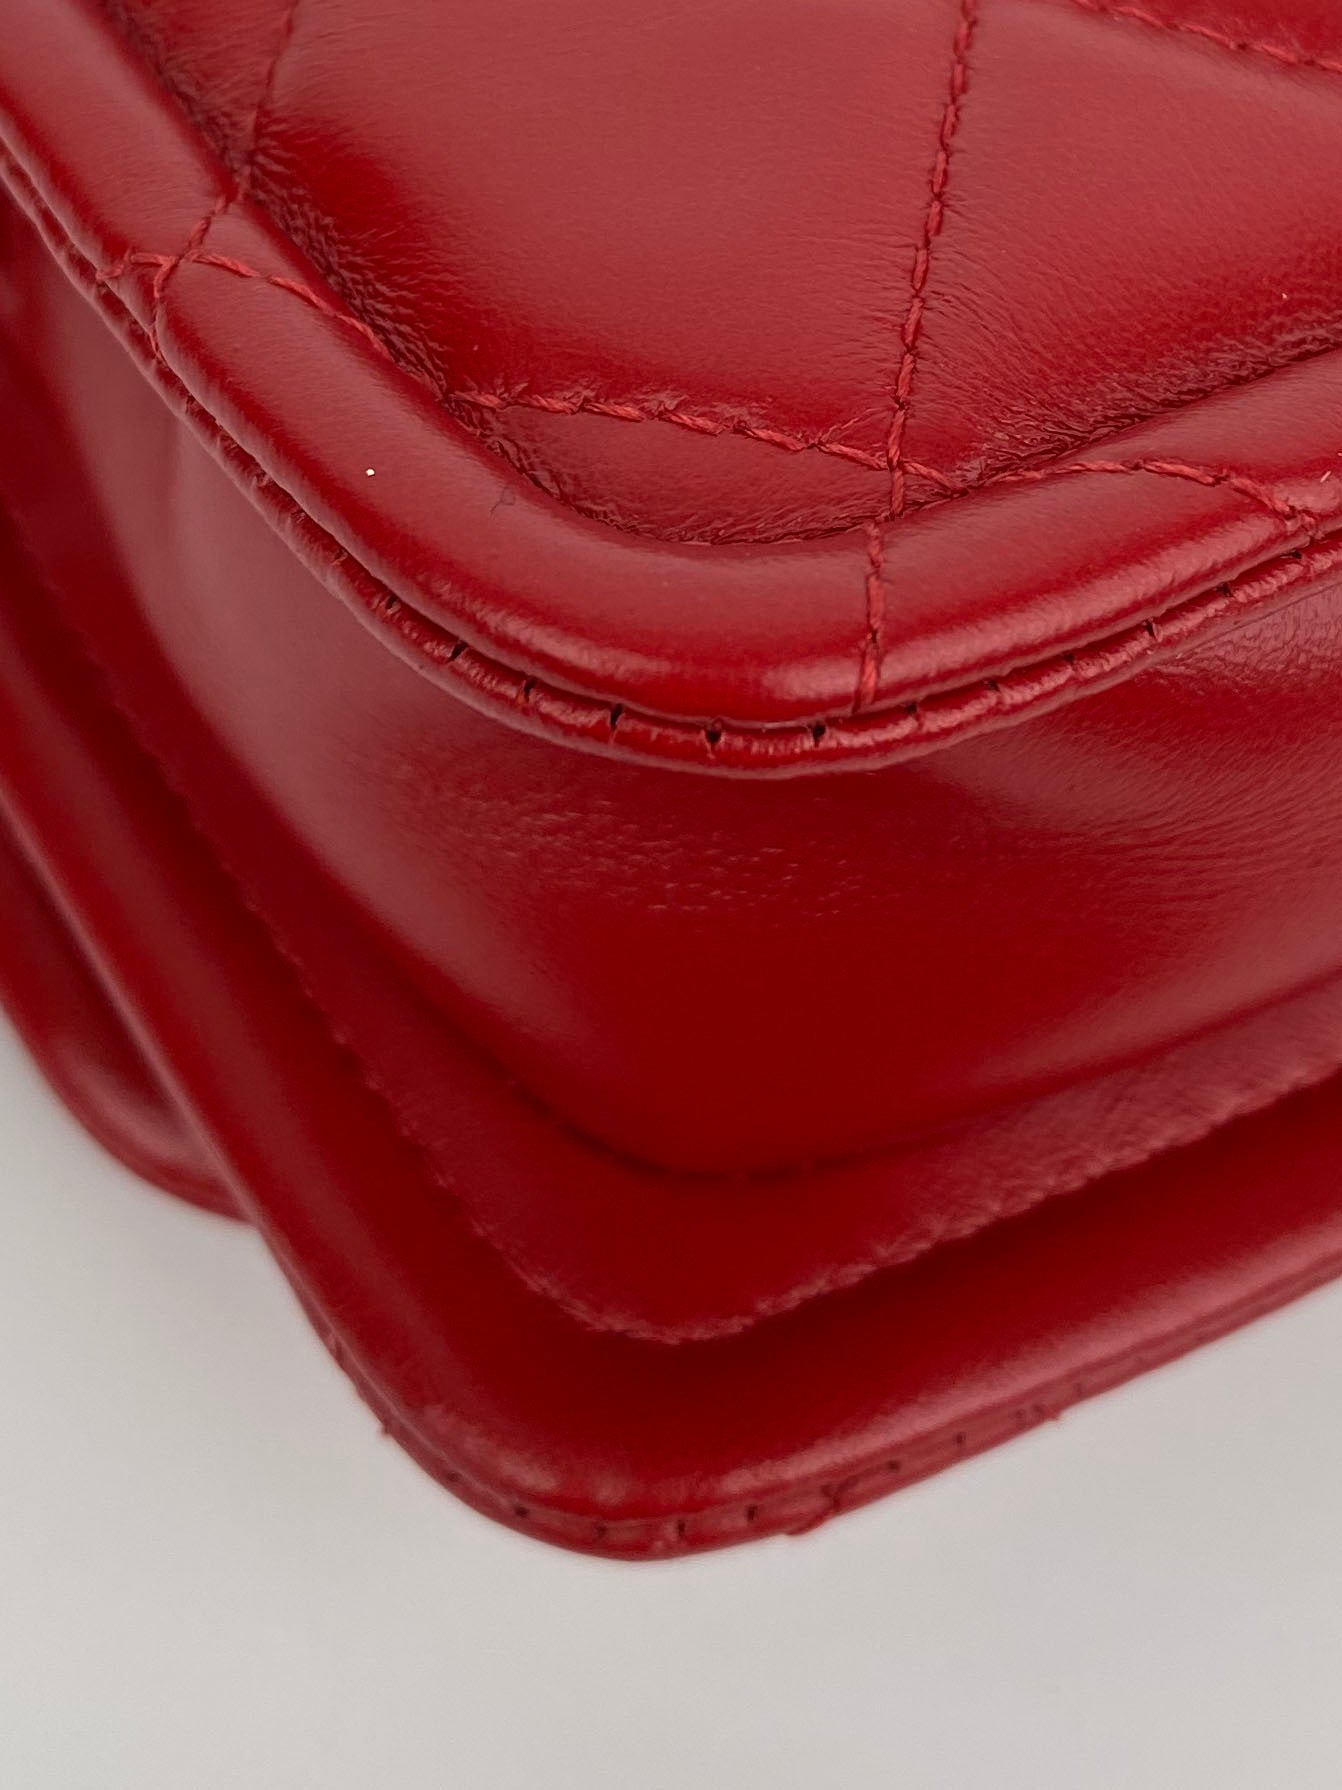 Chanel Small Red Flap Bag